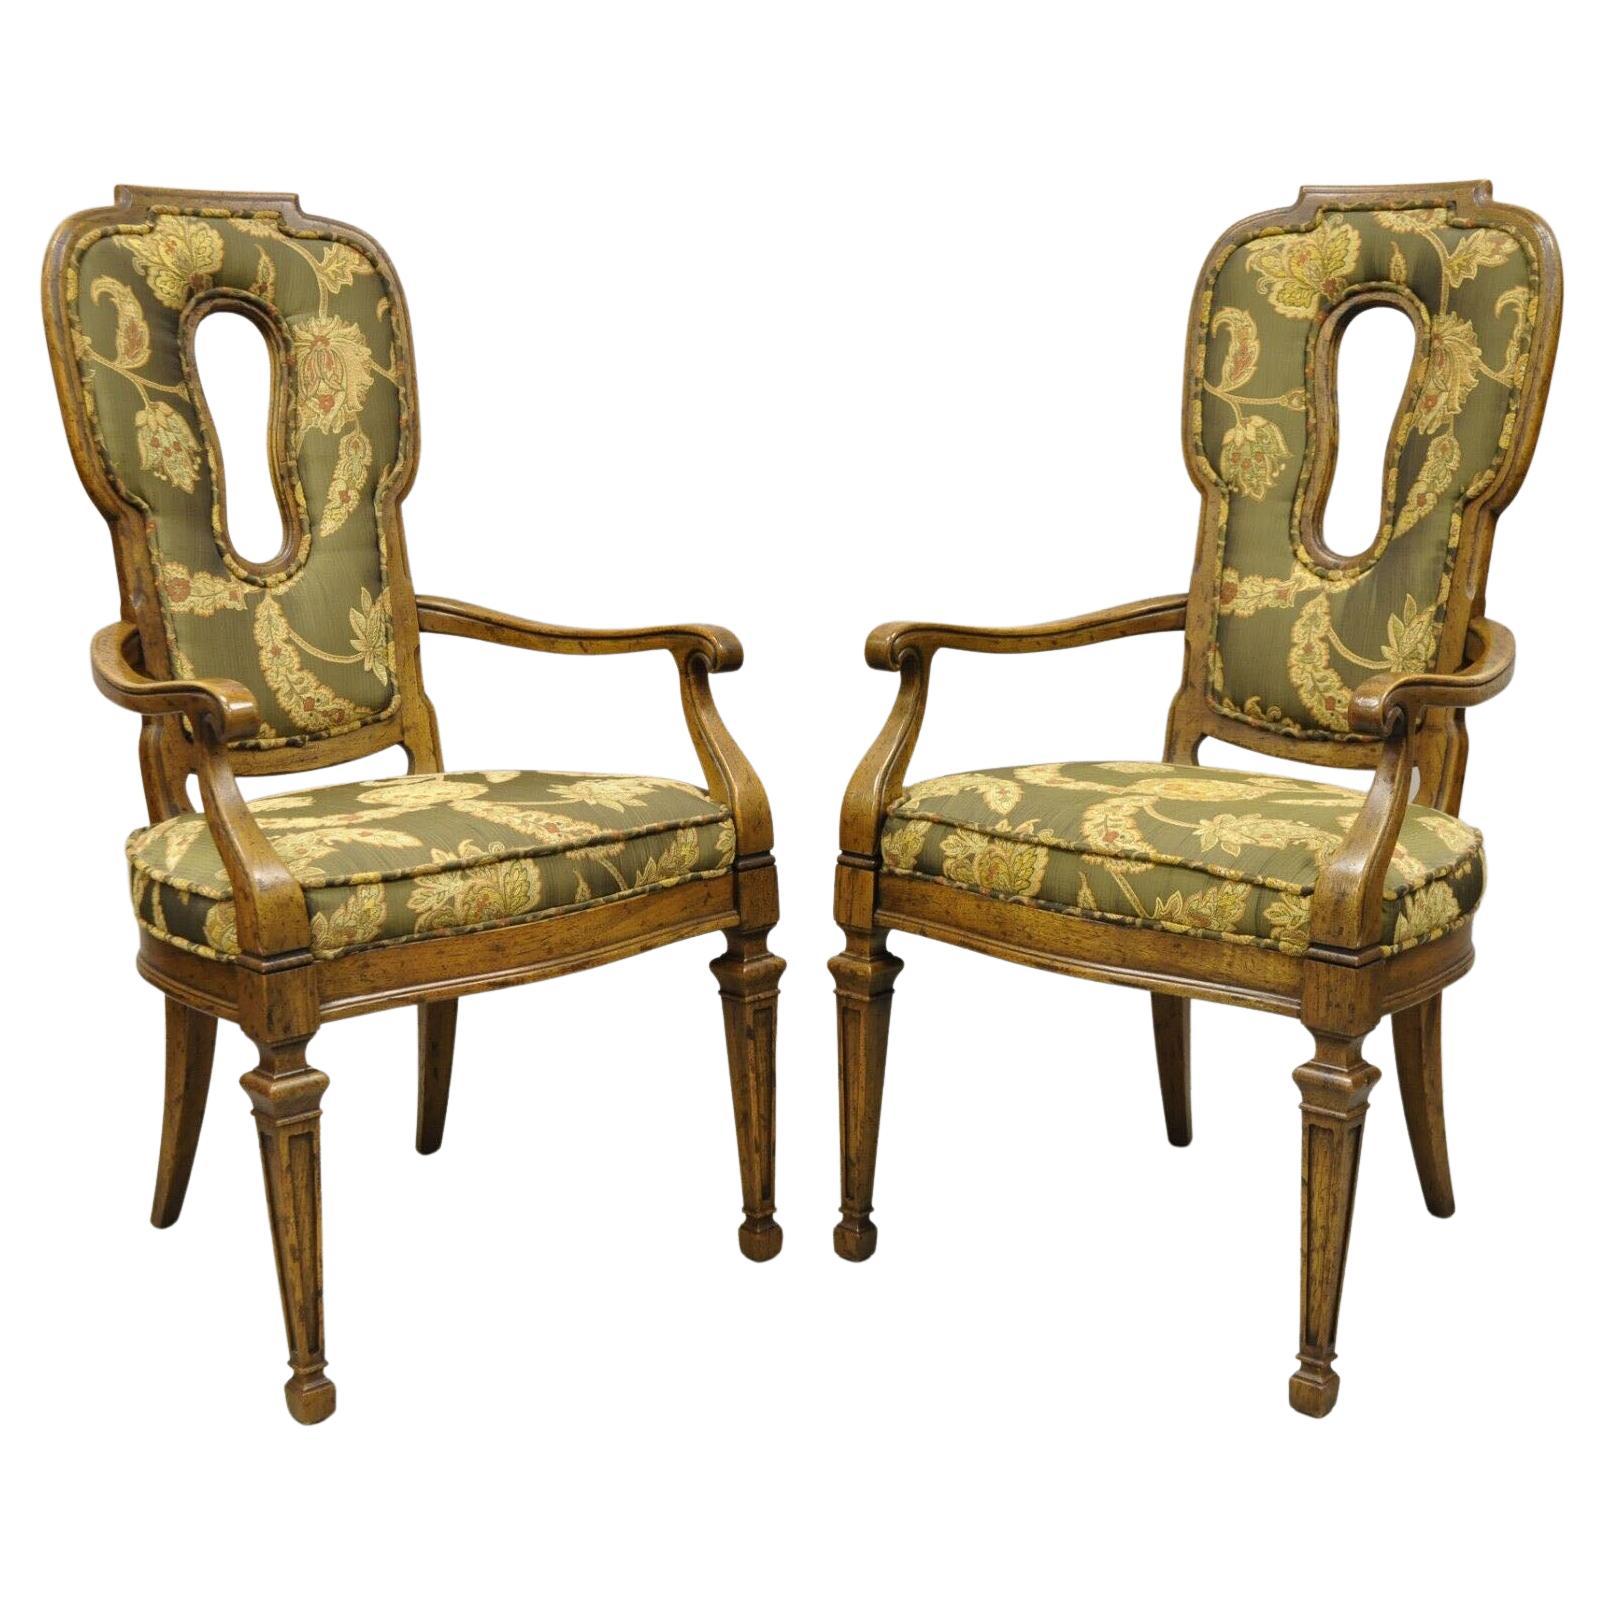 Vintage Hollywood Regency Keyhole Back Fireside Lounge Arm Chairs - a Pair For Sale